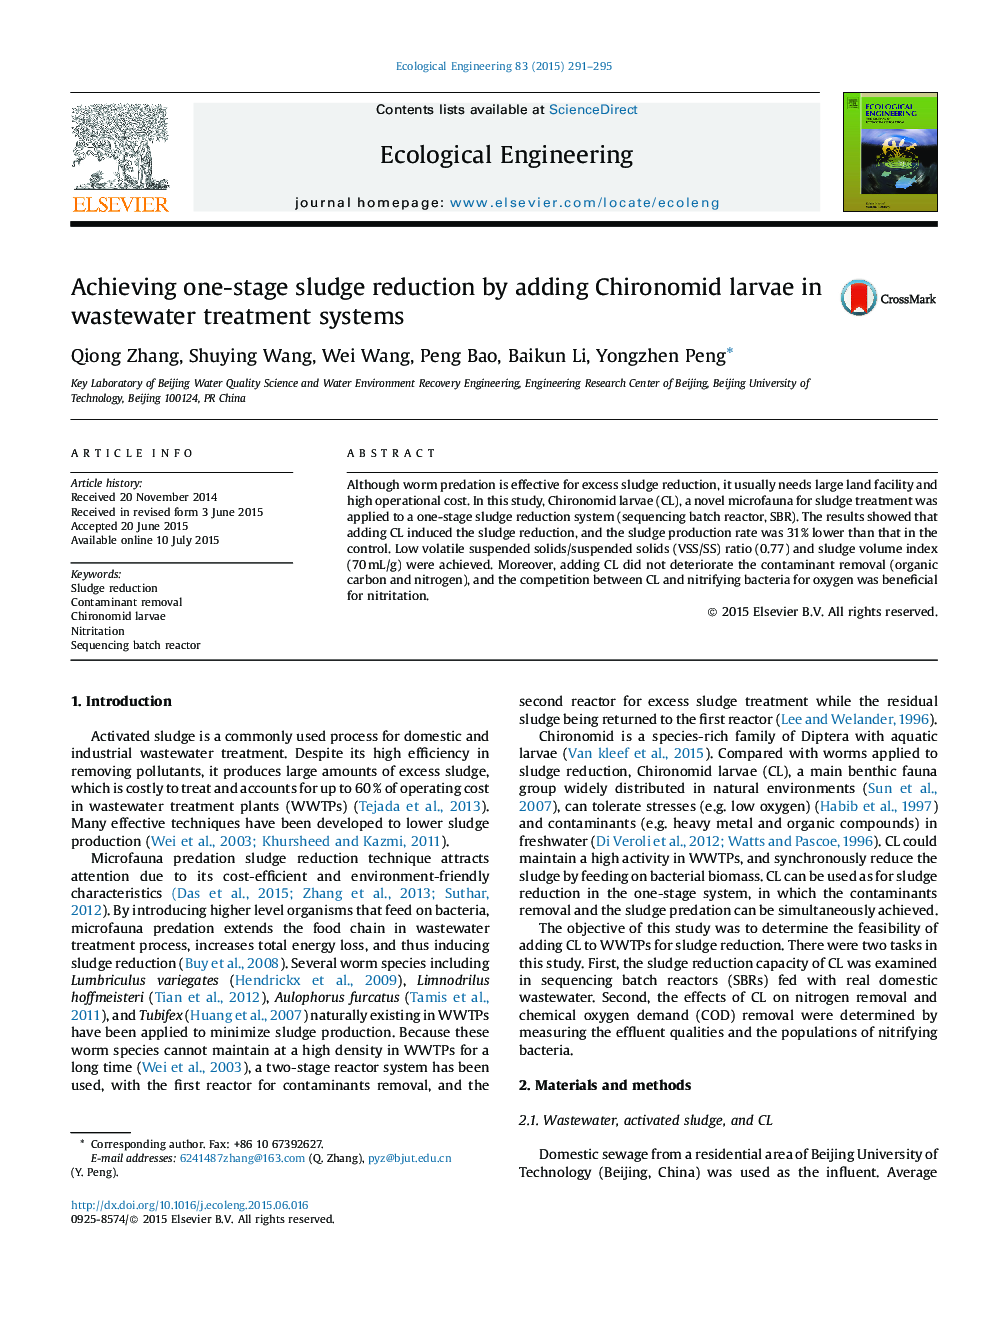 Achieving one-stage sludge reduction by adding Chironomid larvae in wastewater treatment systems